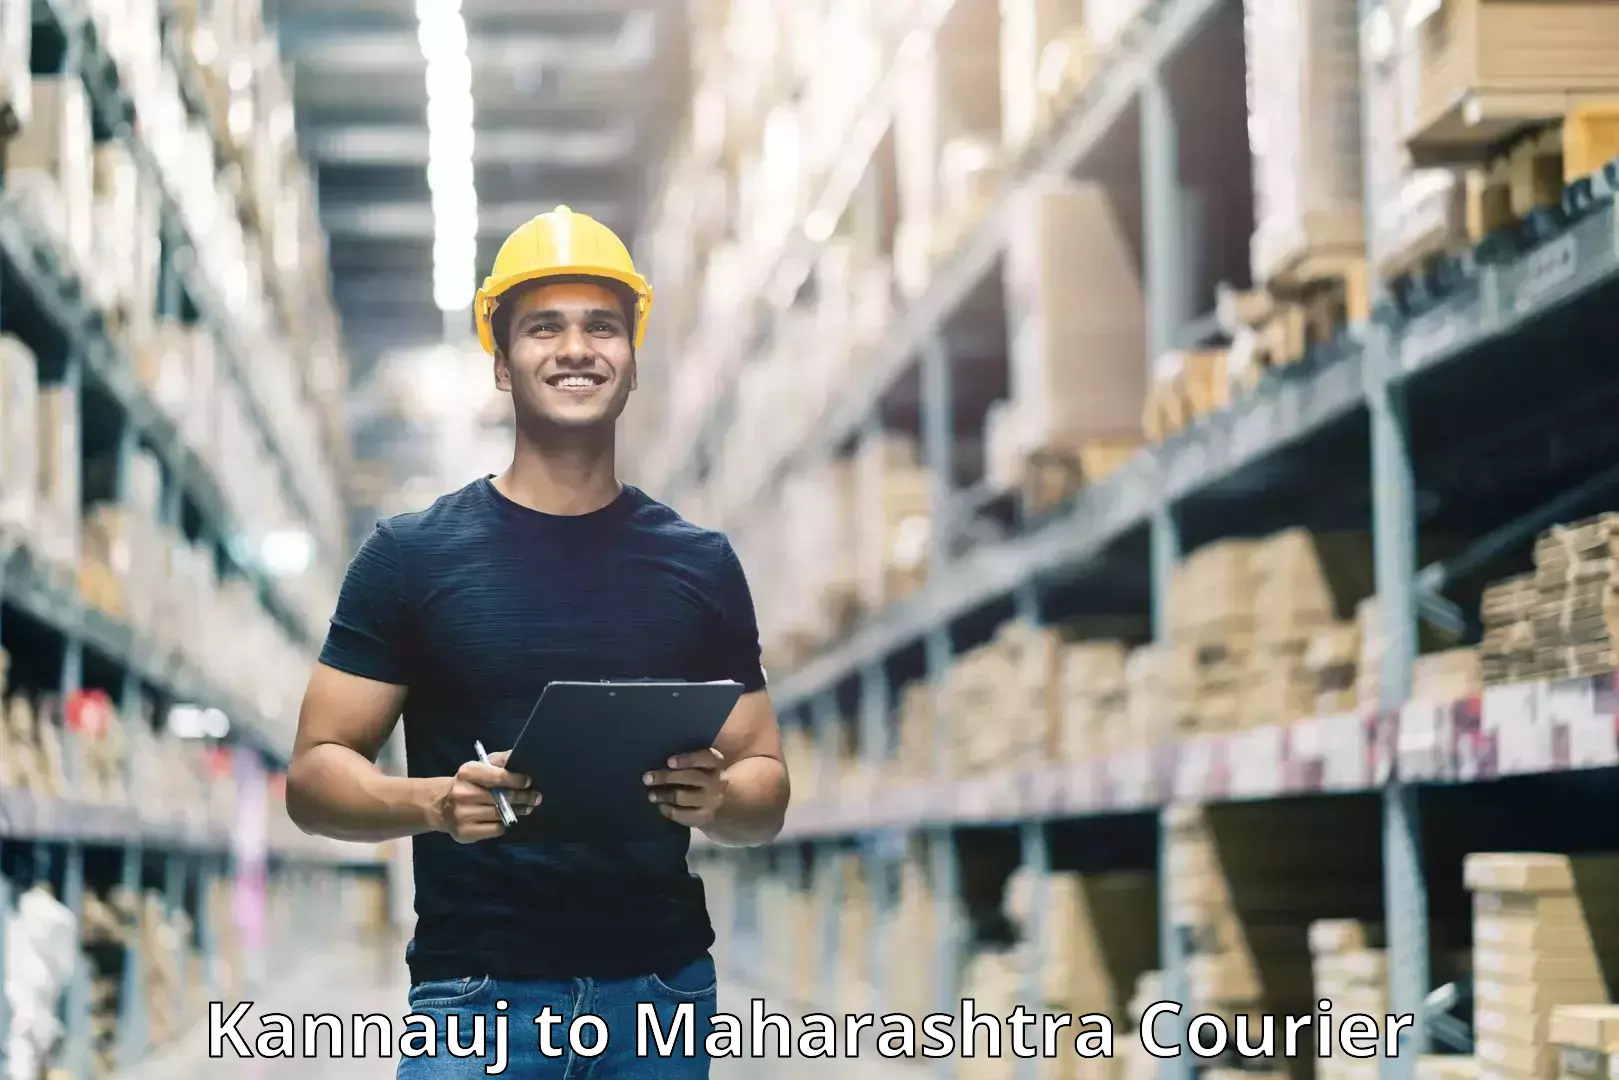 Customer-oriented courier services in Kannauj to Maharashtra